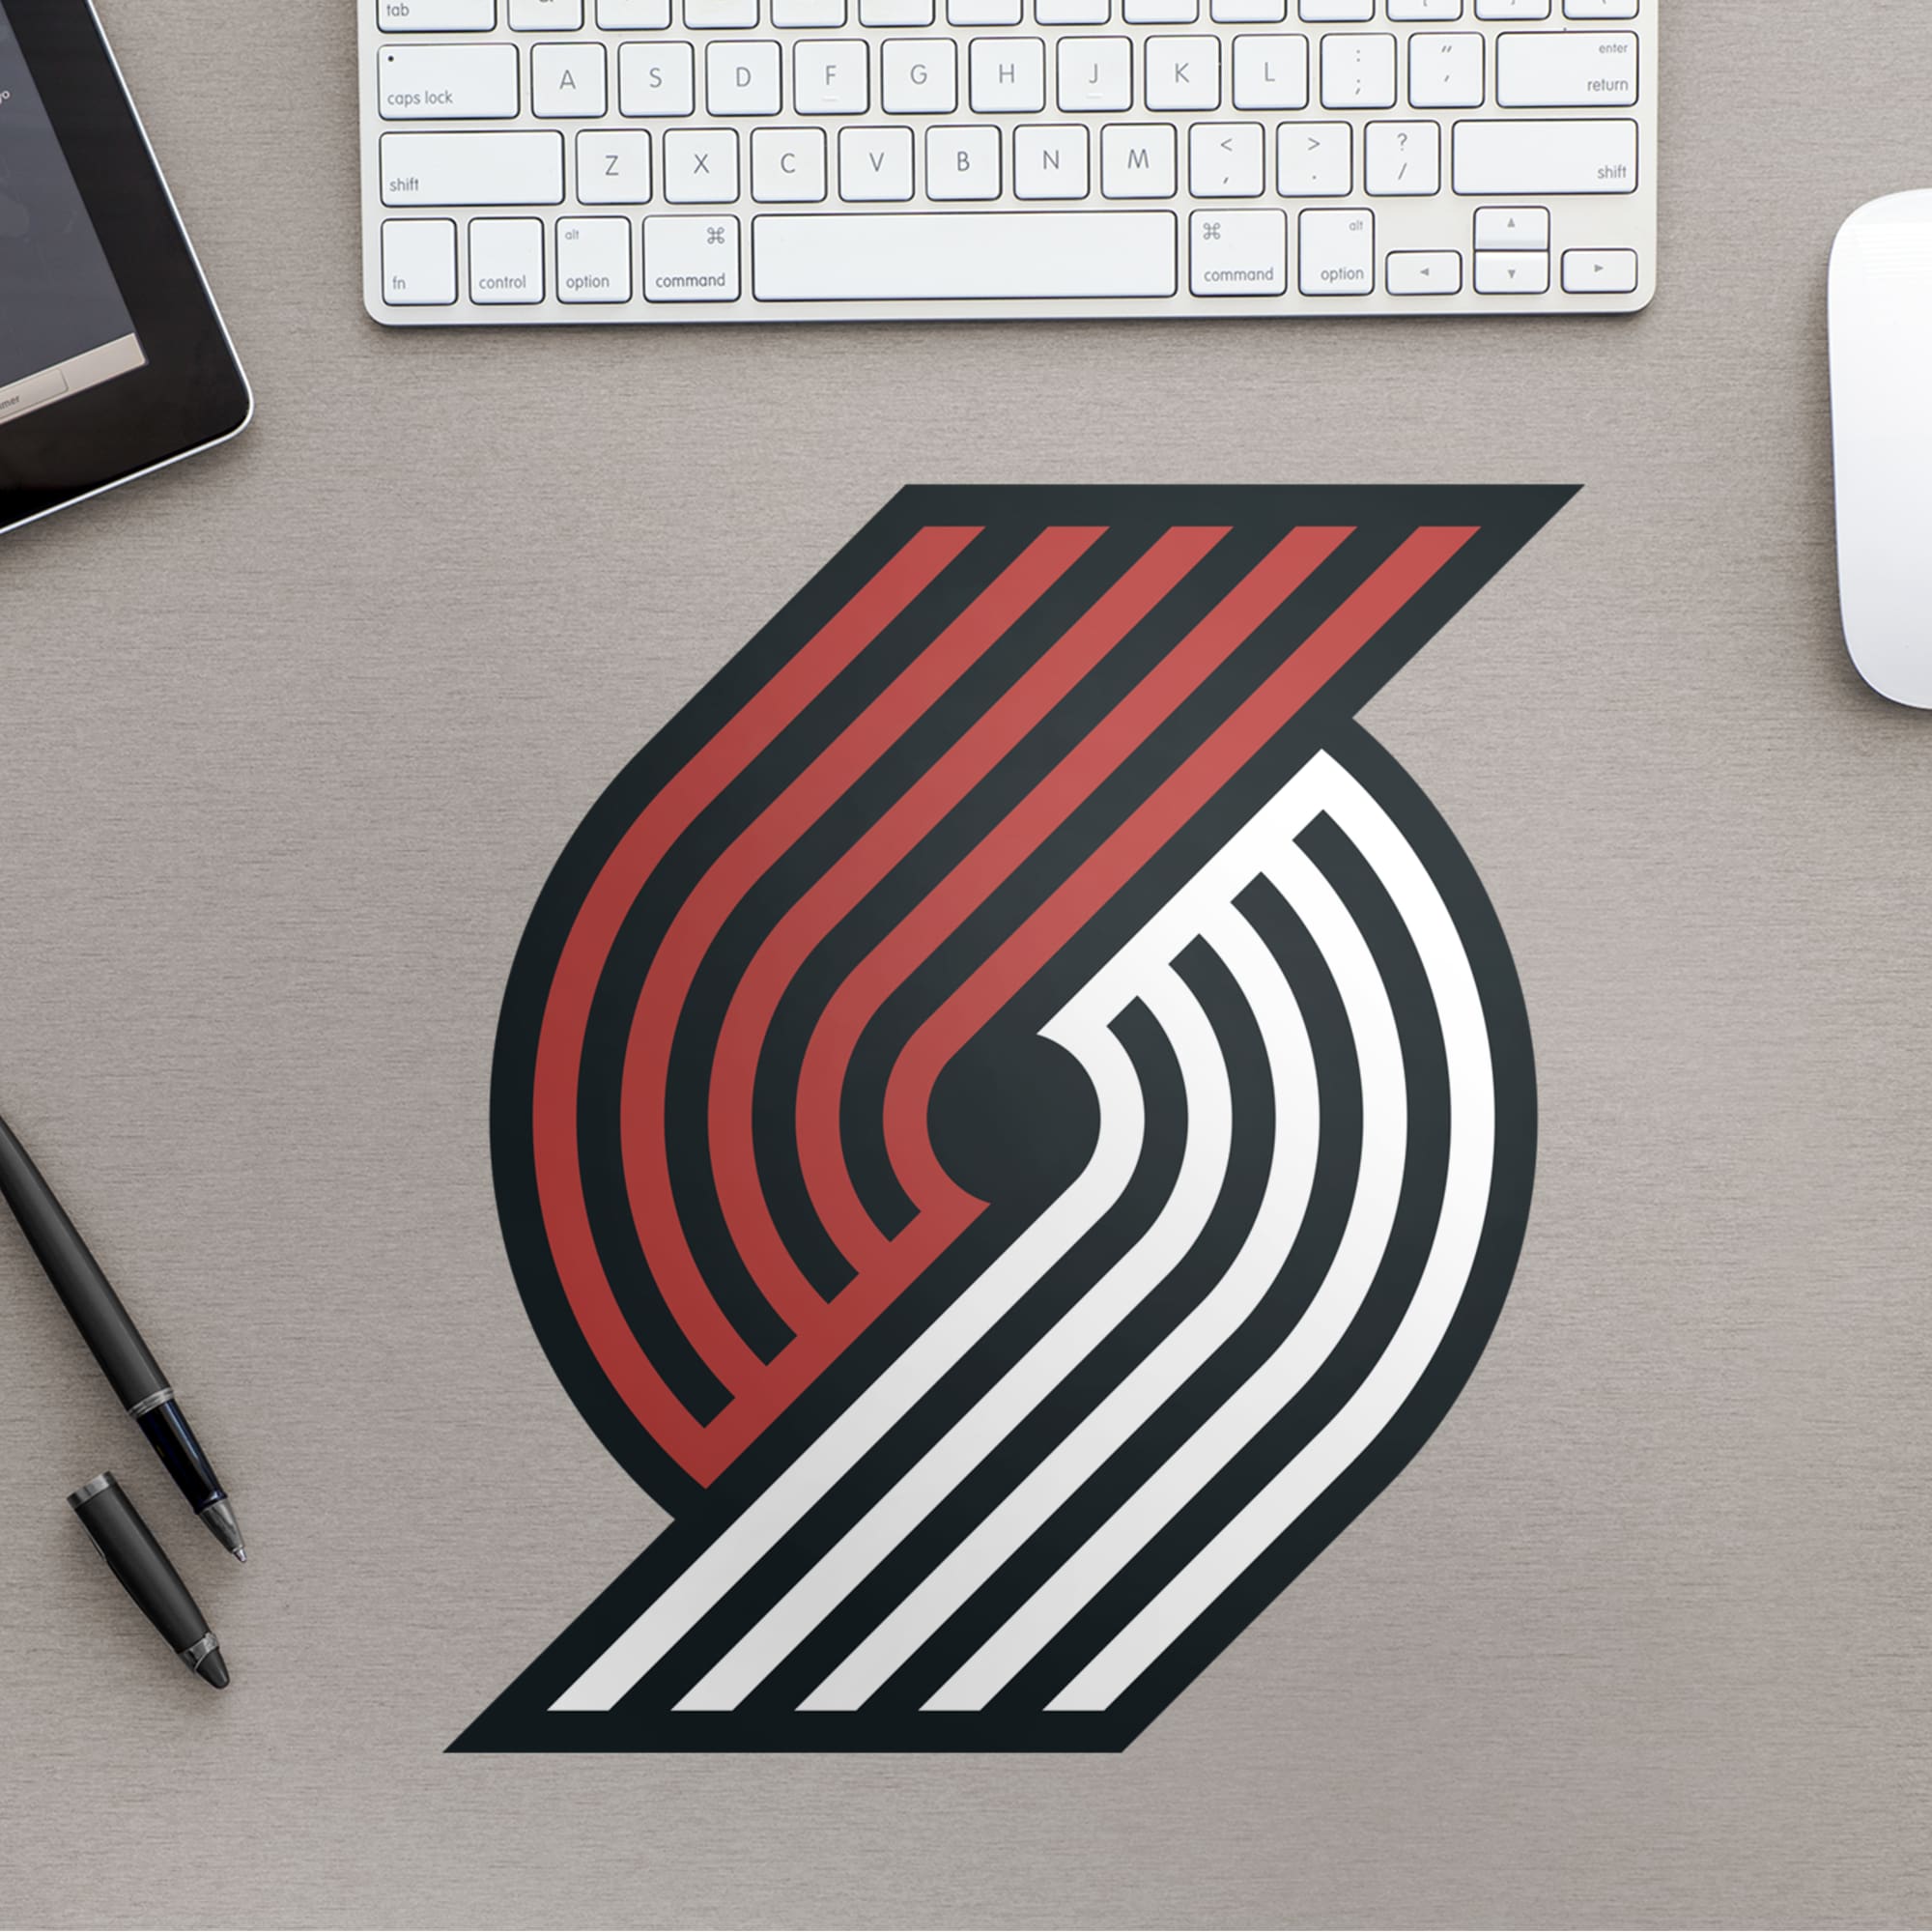 Portland Trail Blazers: Logo - Officially Licensed NBA Removable Wall Decal Large by Fathead | Vinyl